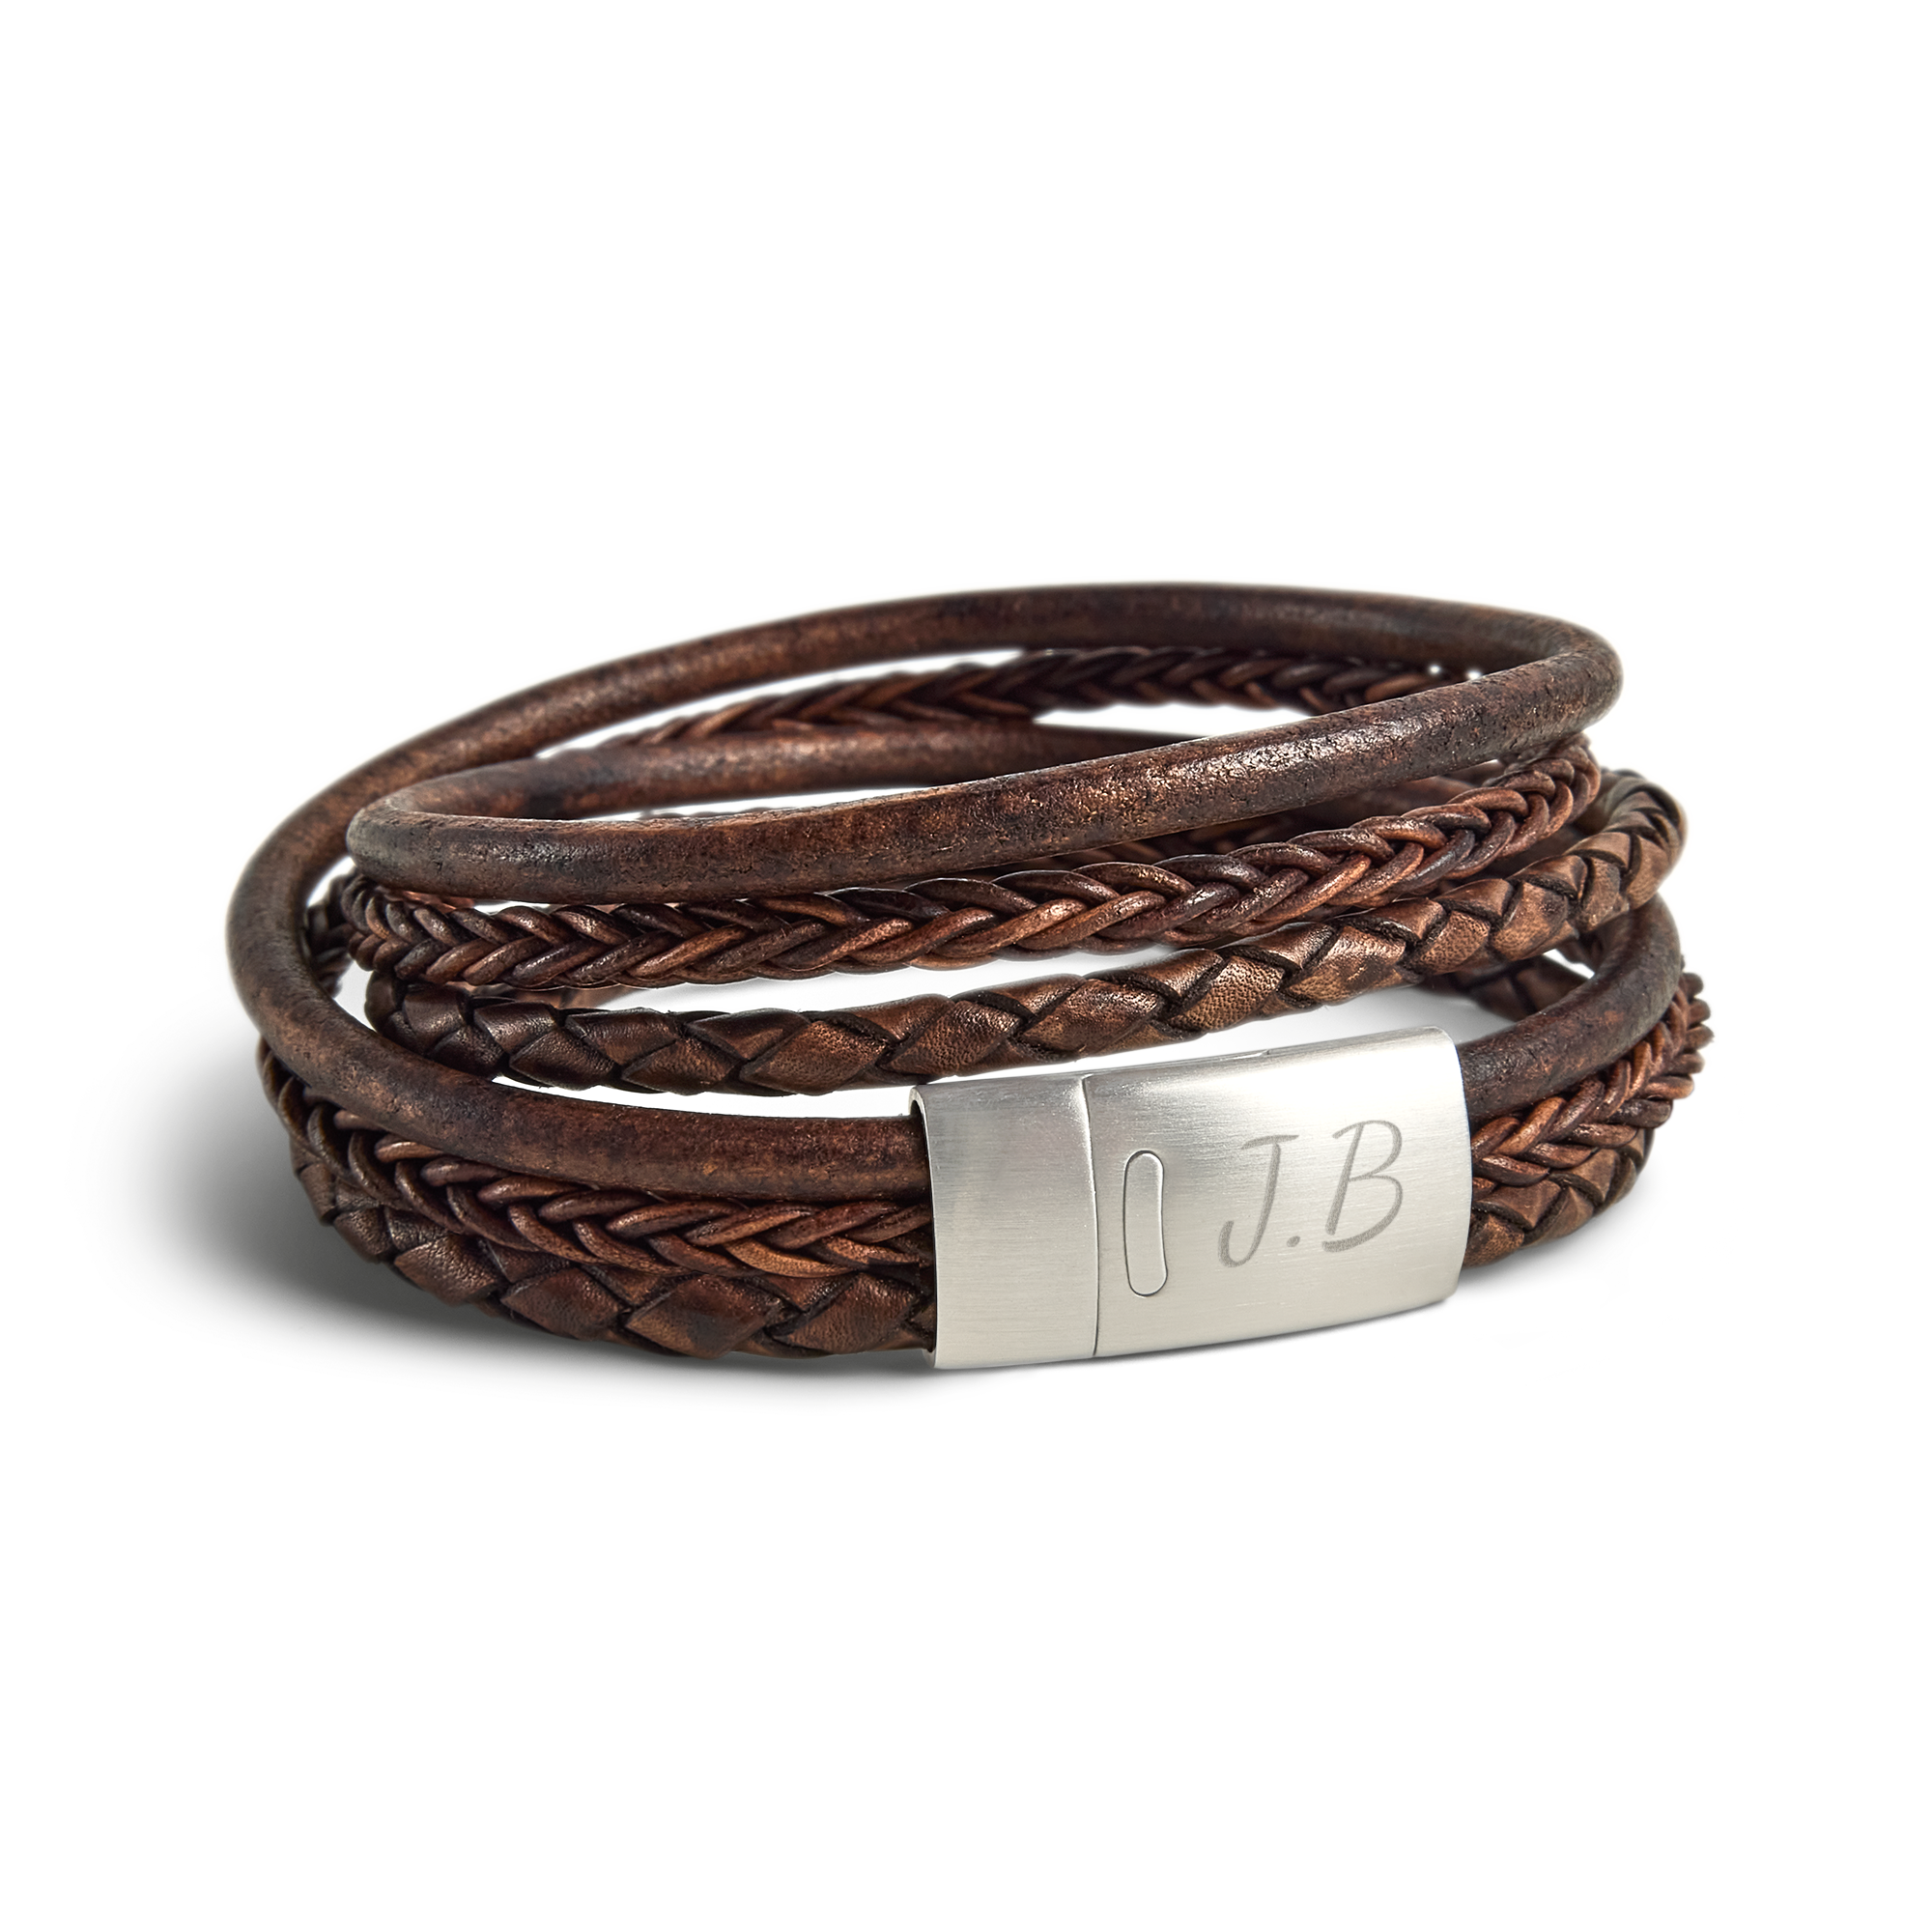 Luxurious double leather bracelet with engraving - Men - Brown - S 